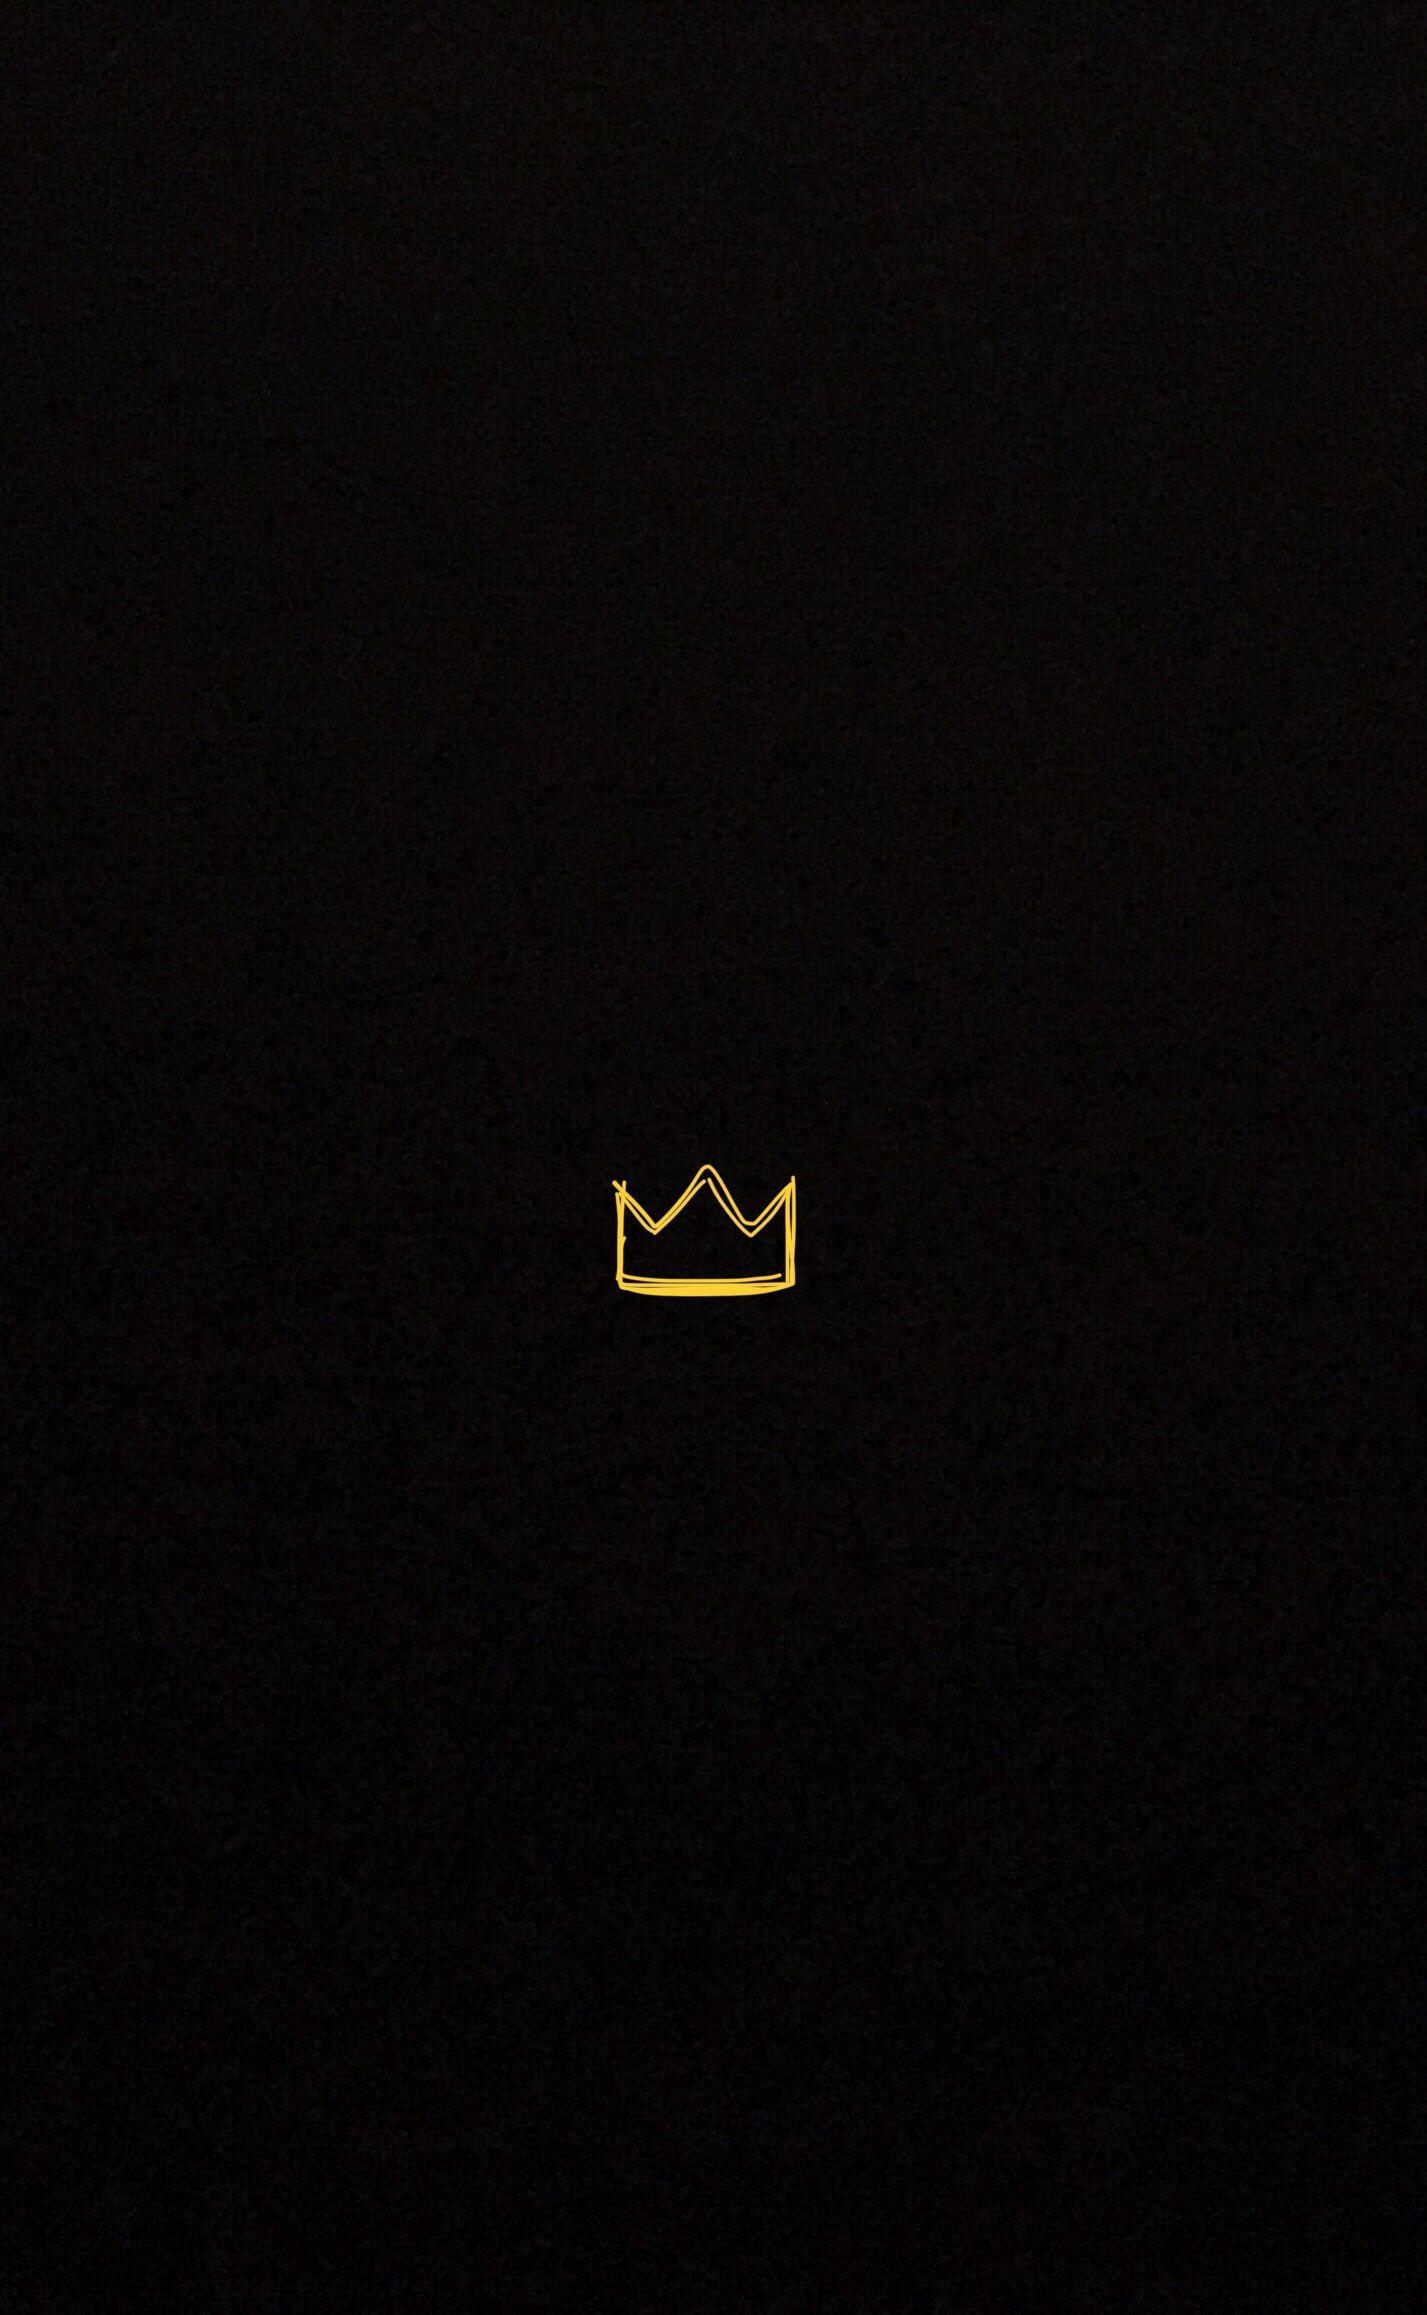 King Crown Wallpapers Top Free King Crown Backgrounds Wallpaperaccess